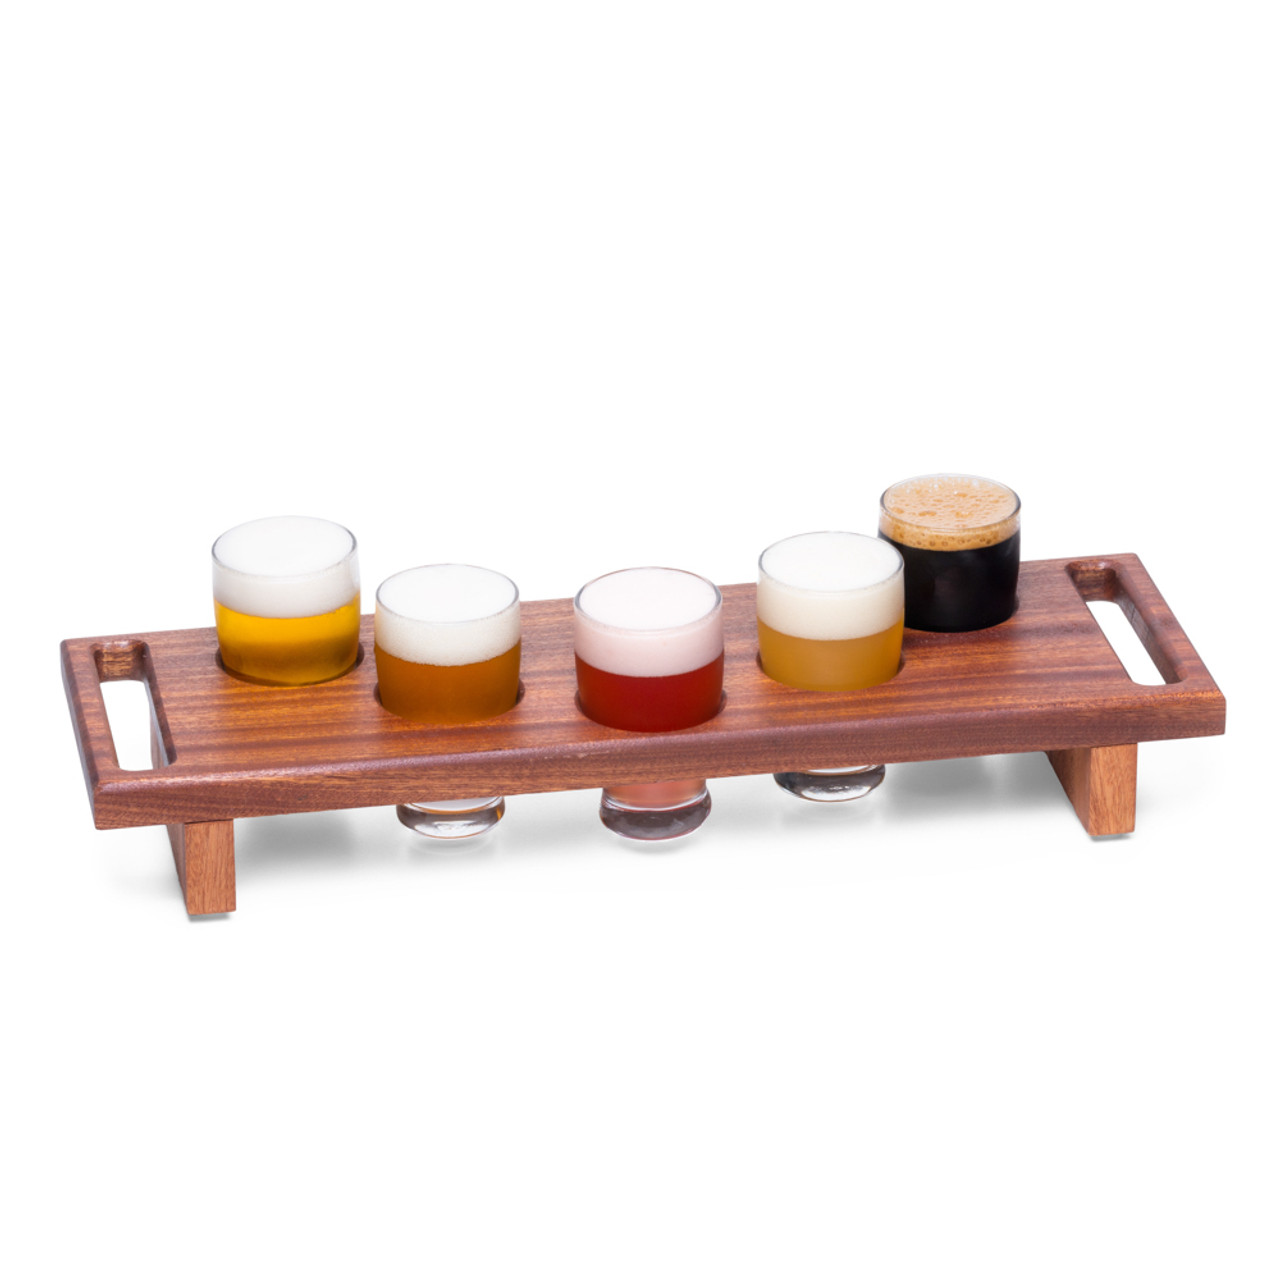 https://cdn11.bigcommerce.com/s-cznxq08r7/images/stencil/1280x1280/products/5423/14670/MAGHY-5-GLASS-SET6_Premium_Handmade_Mahogany_Wood_Beer_Flight_Tray_Set_with_Tasting_Glasses_-_6_Pieces_1__66265.1661264560.jpg?c=1